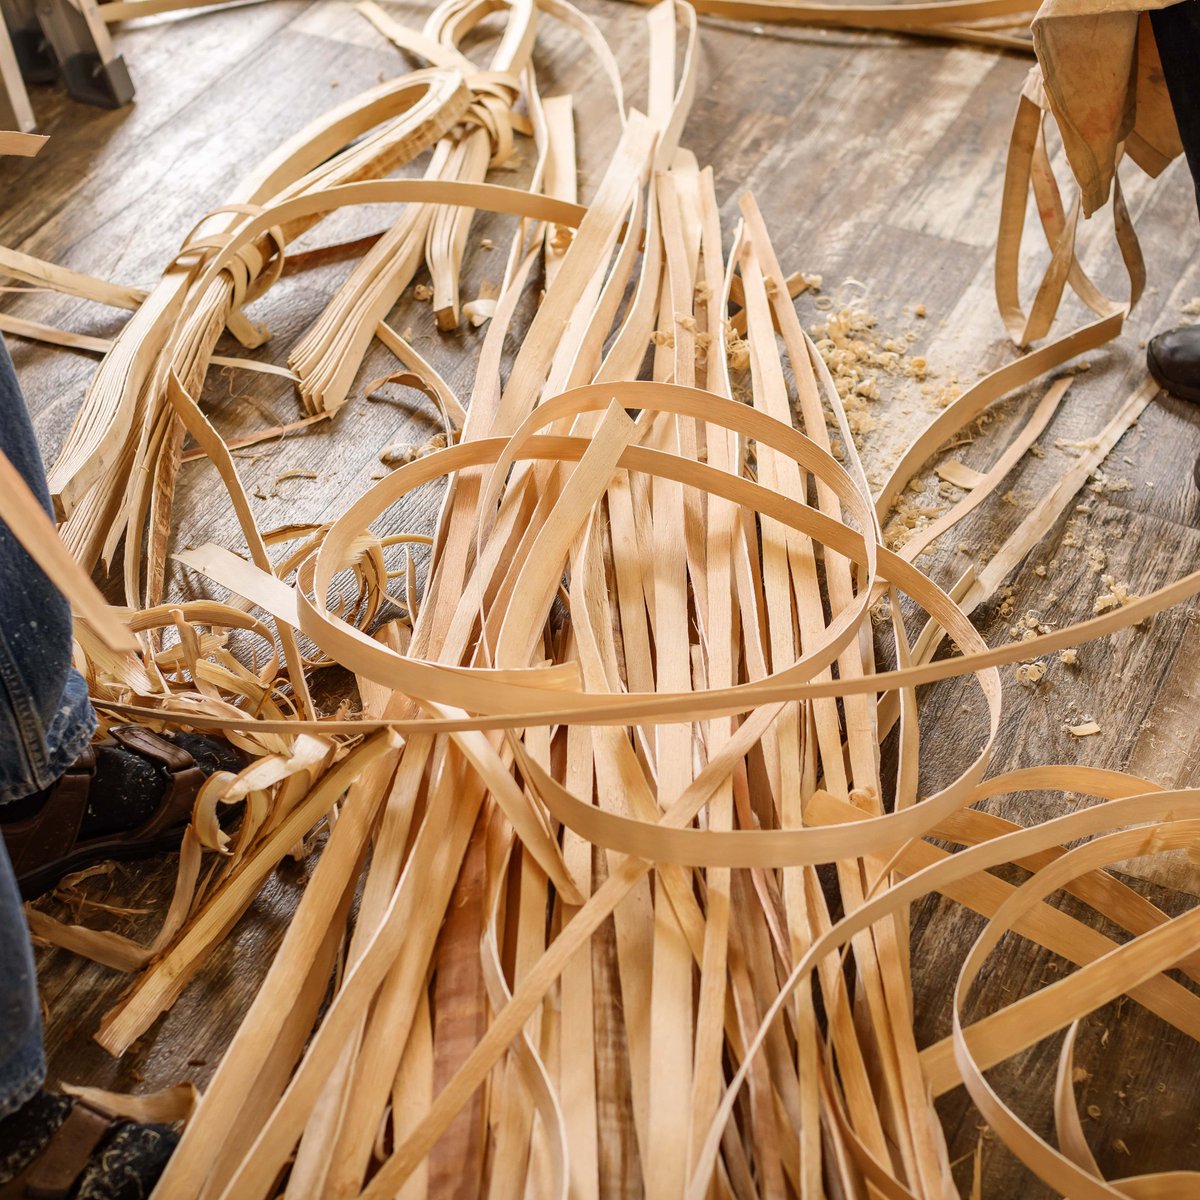 In the hands of an expert basket maker, these ash splints become a beautiful basket in just a few hours! 🧡

These baskets can last indefinitely and be passed down for generations if stored in a moderate environment. Not too dry (not in an attic) and not too wet or humid.